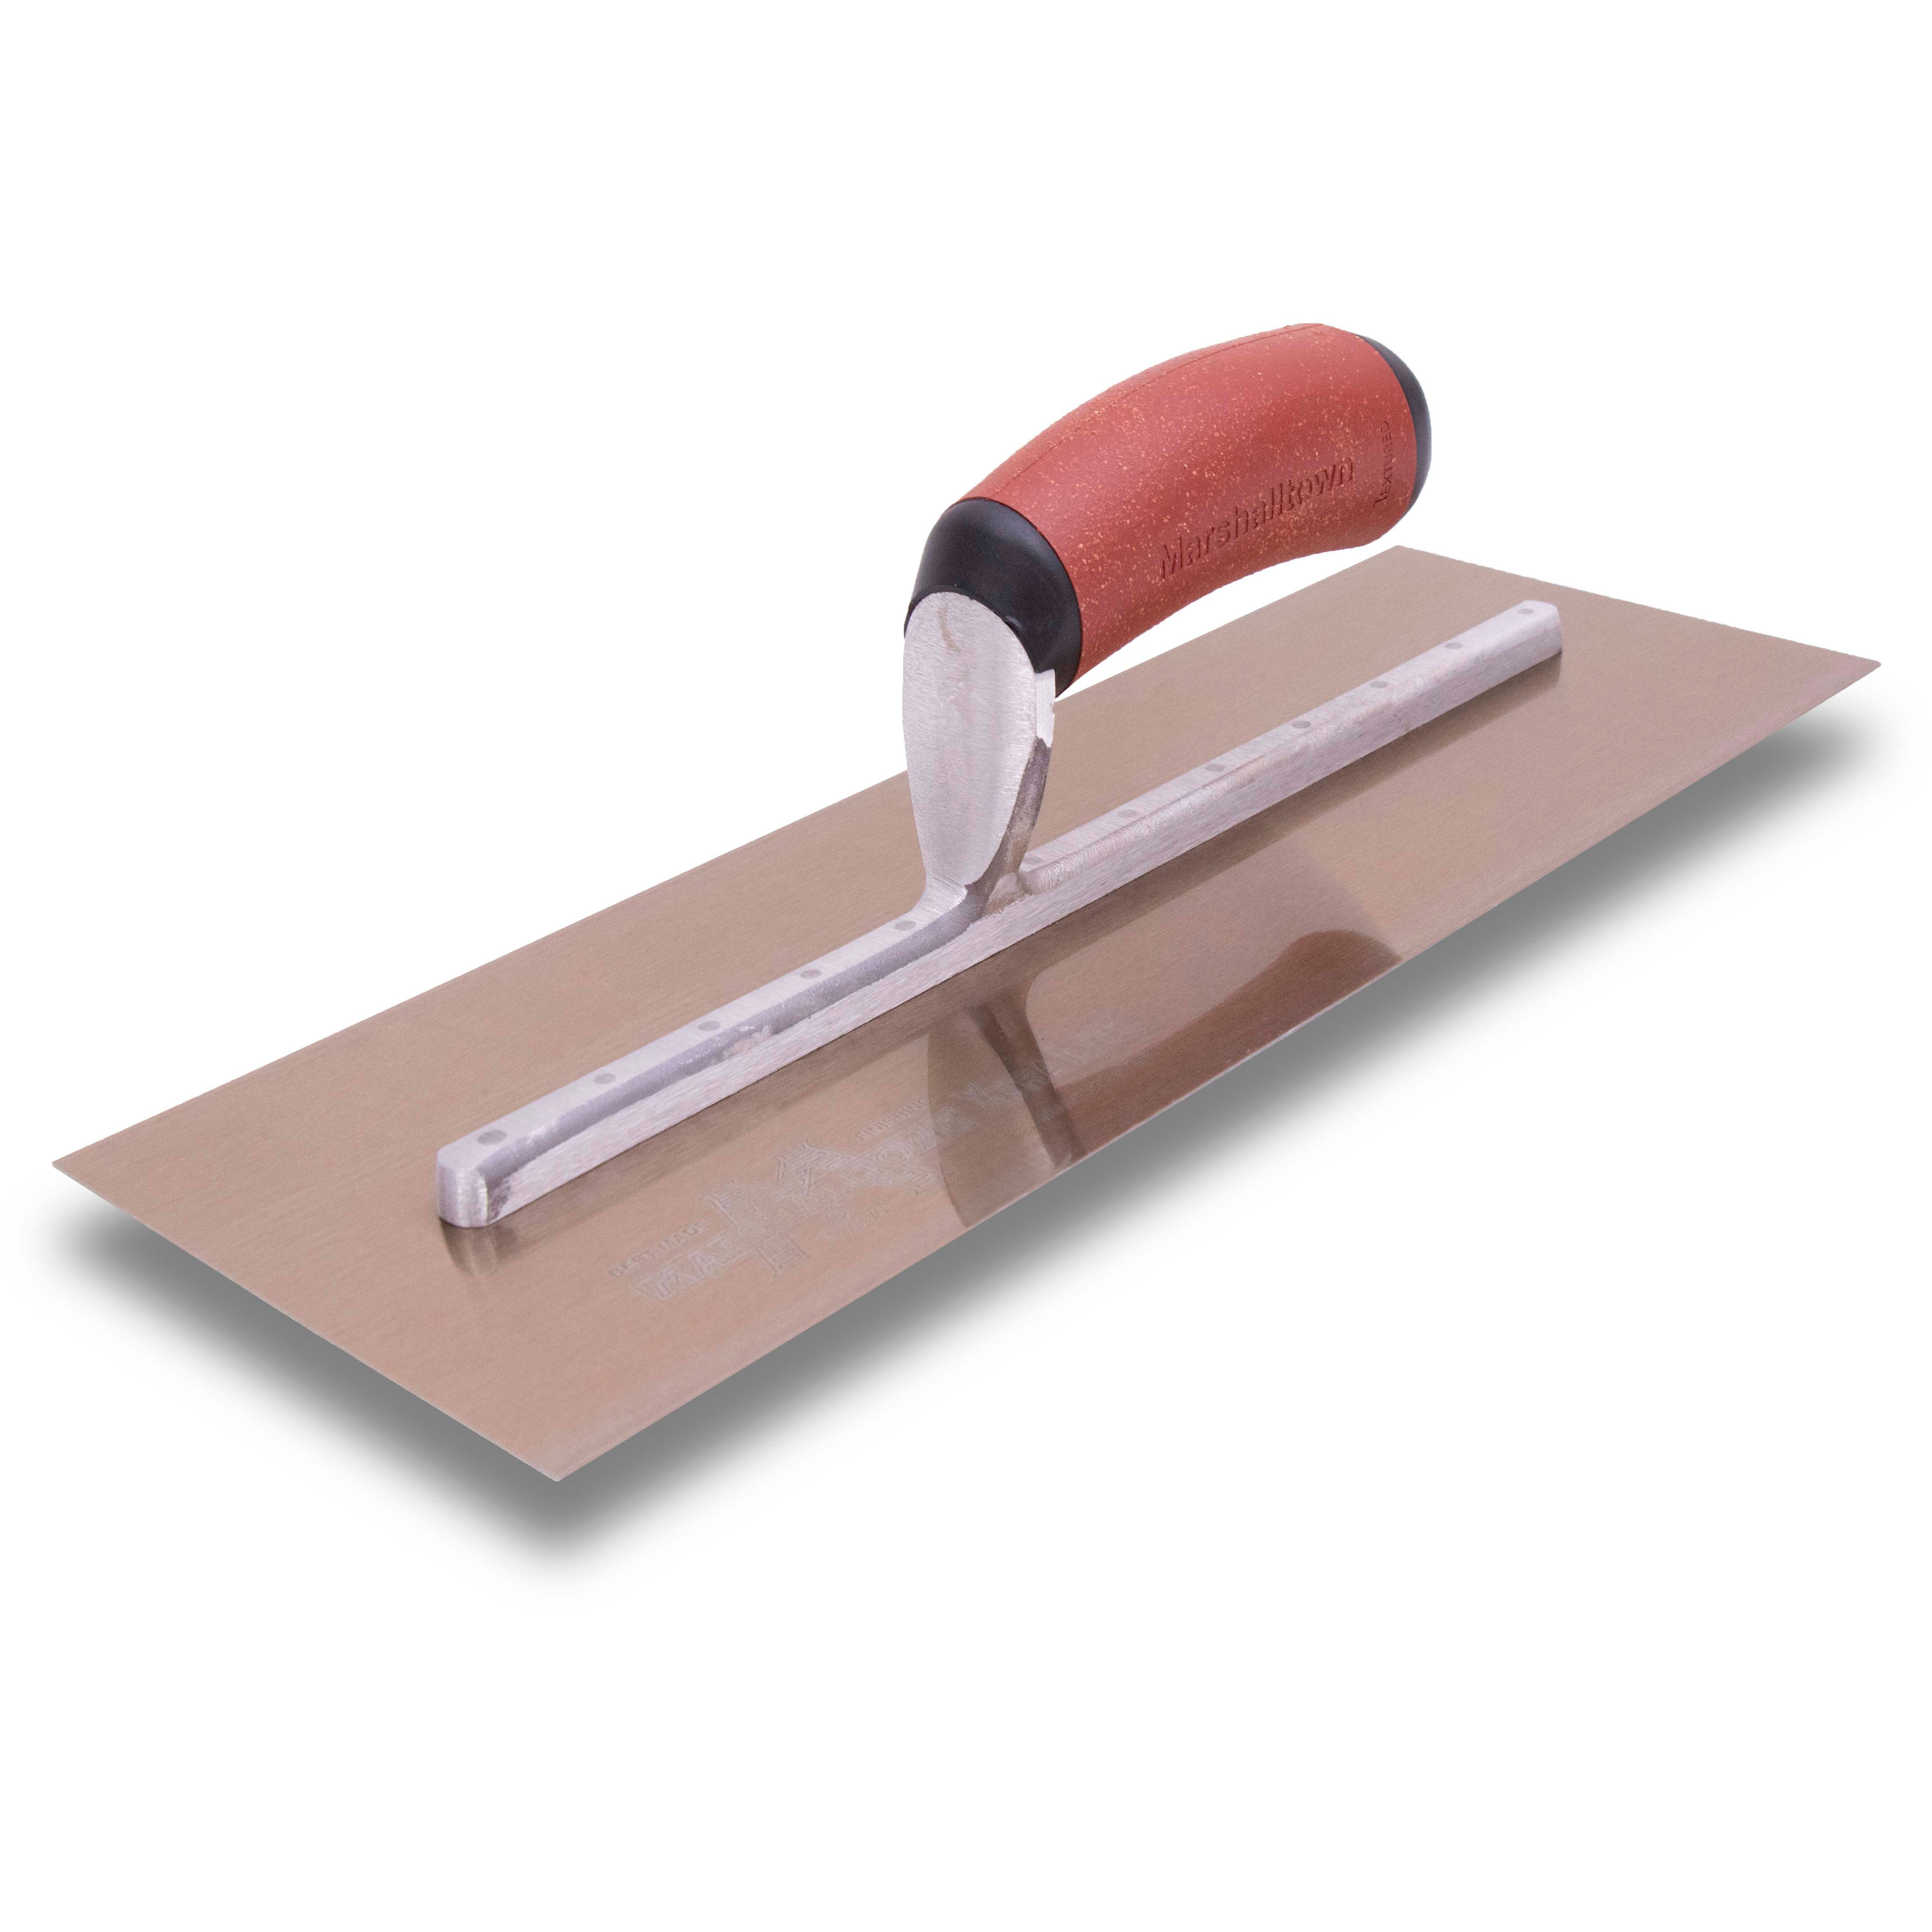 Marshalltown MXS91GSDC 10-1/2in x 4-1/2in Golden Stainless Finishing Trowel with DuraCork Handle MXS91GSDC